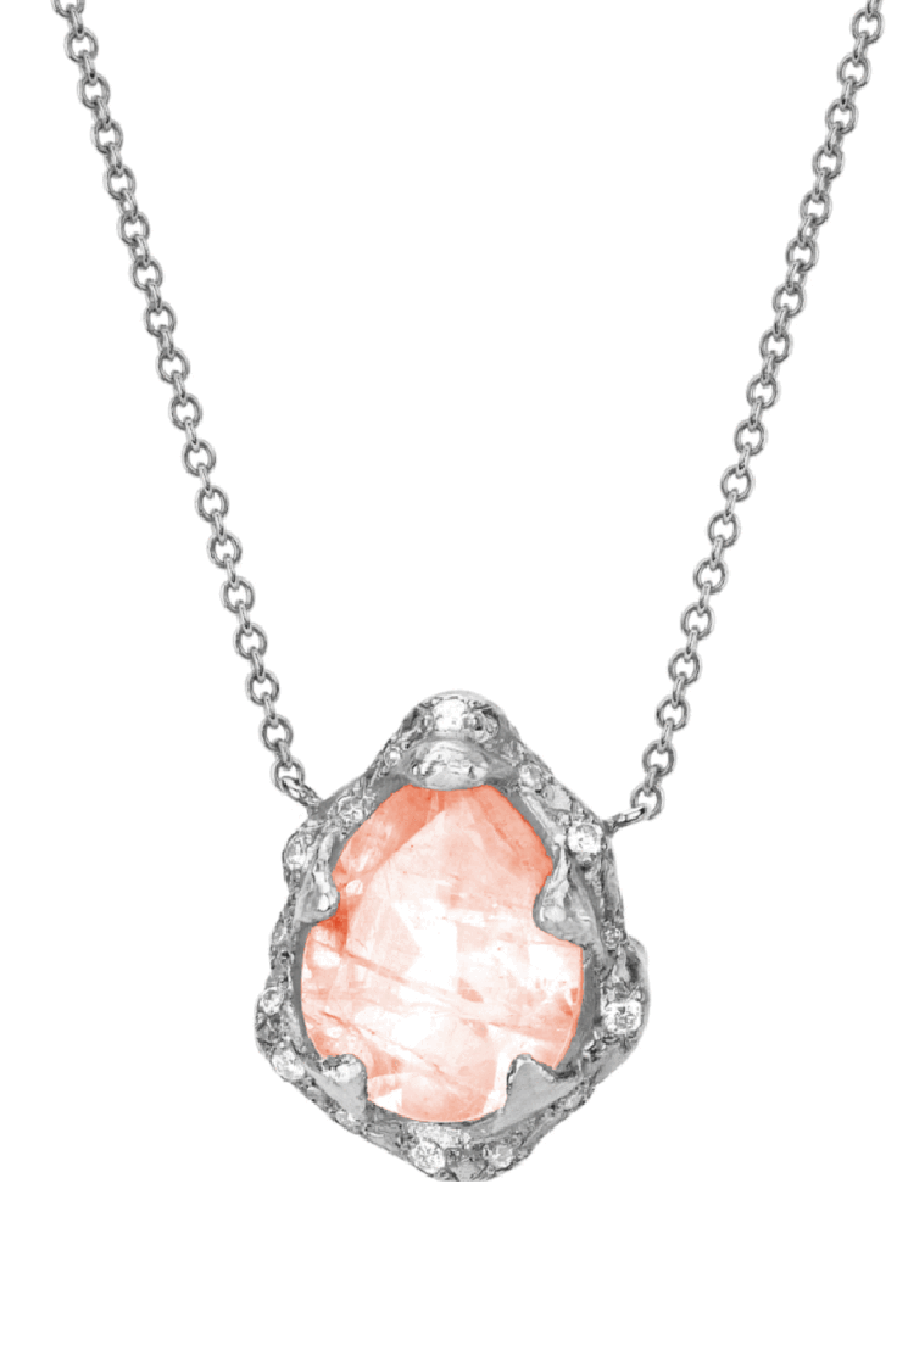 LOGAN HOLLOWELL-Baby Queen Water Drop Morganite Necklace with Sprinkled Diamonds-